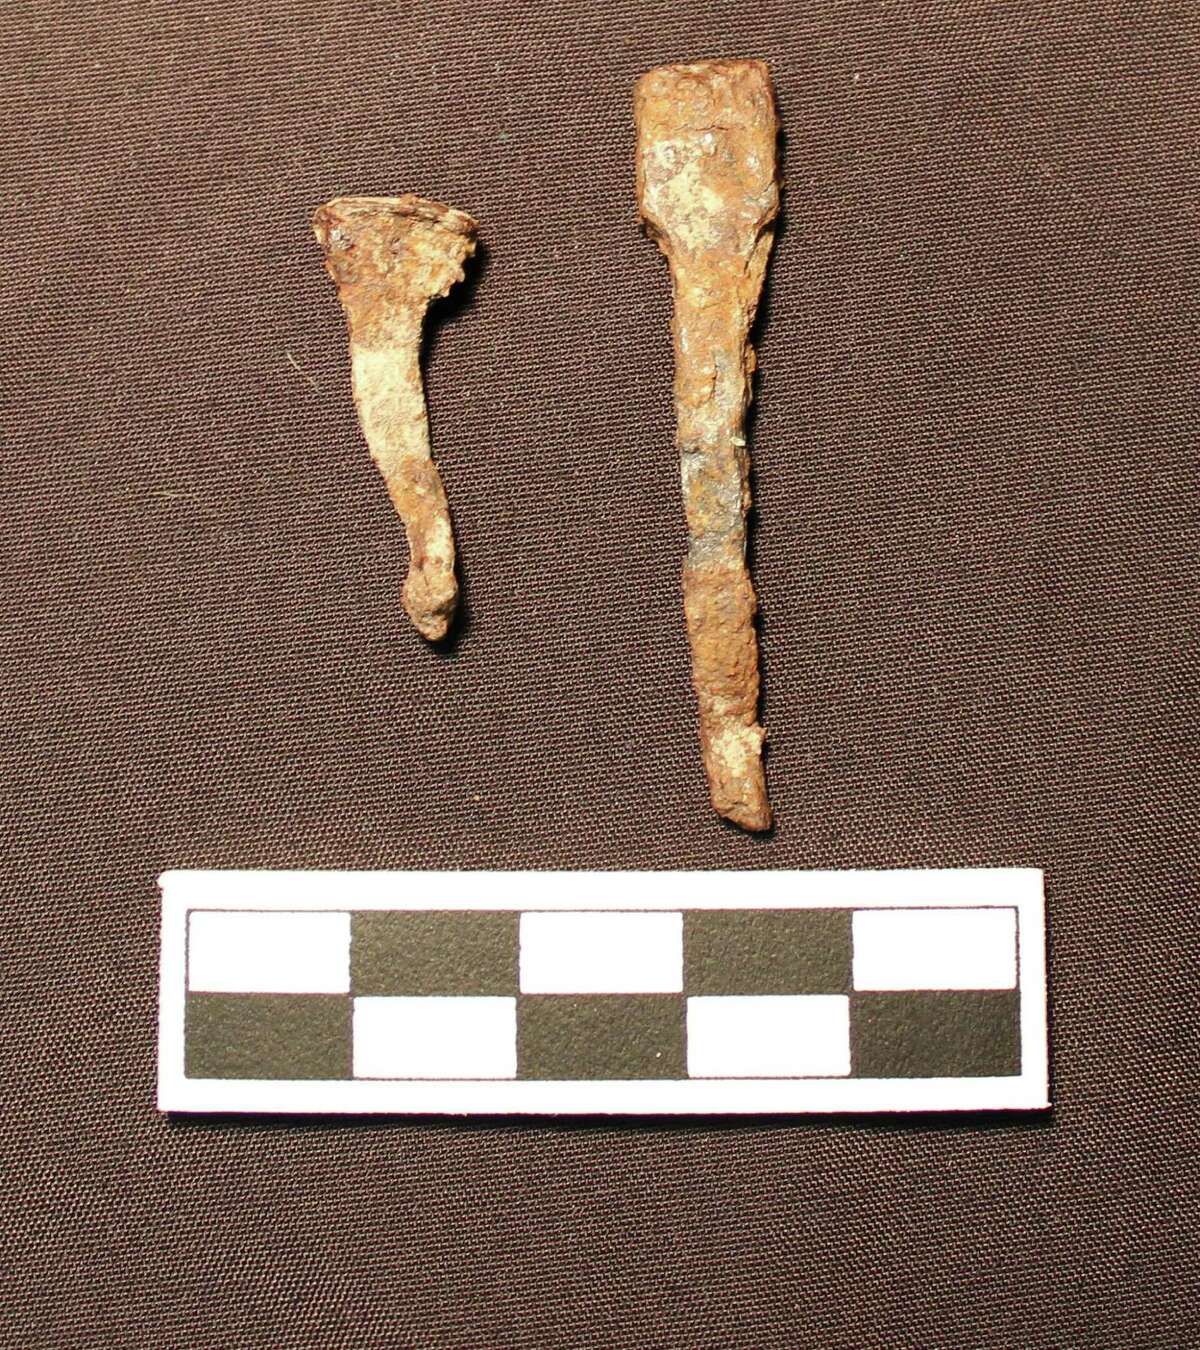 Horseshoe nails found at City Cemetery No. 2 on the East Side, near the site of the newly discovered Spanish colonial powder house and watch tower.